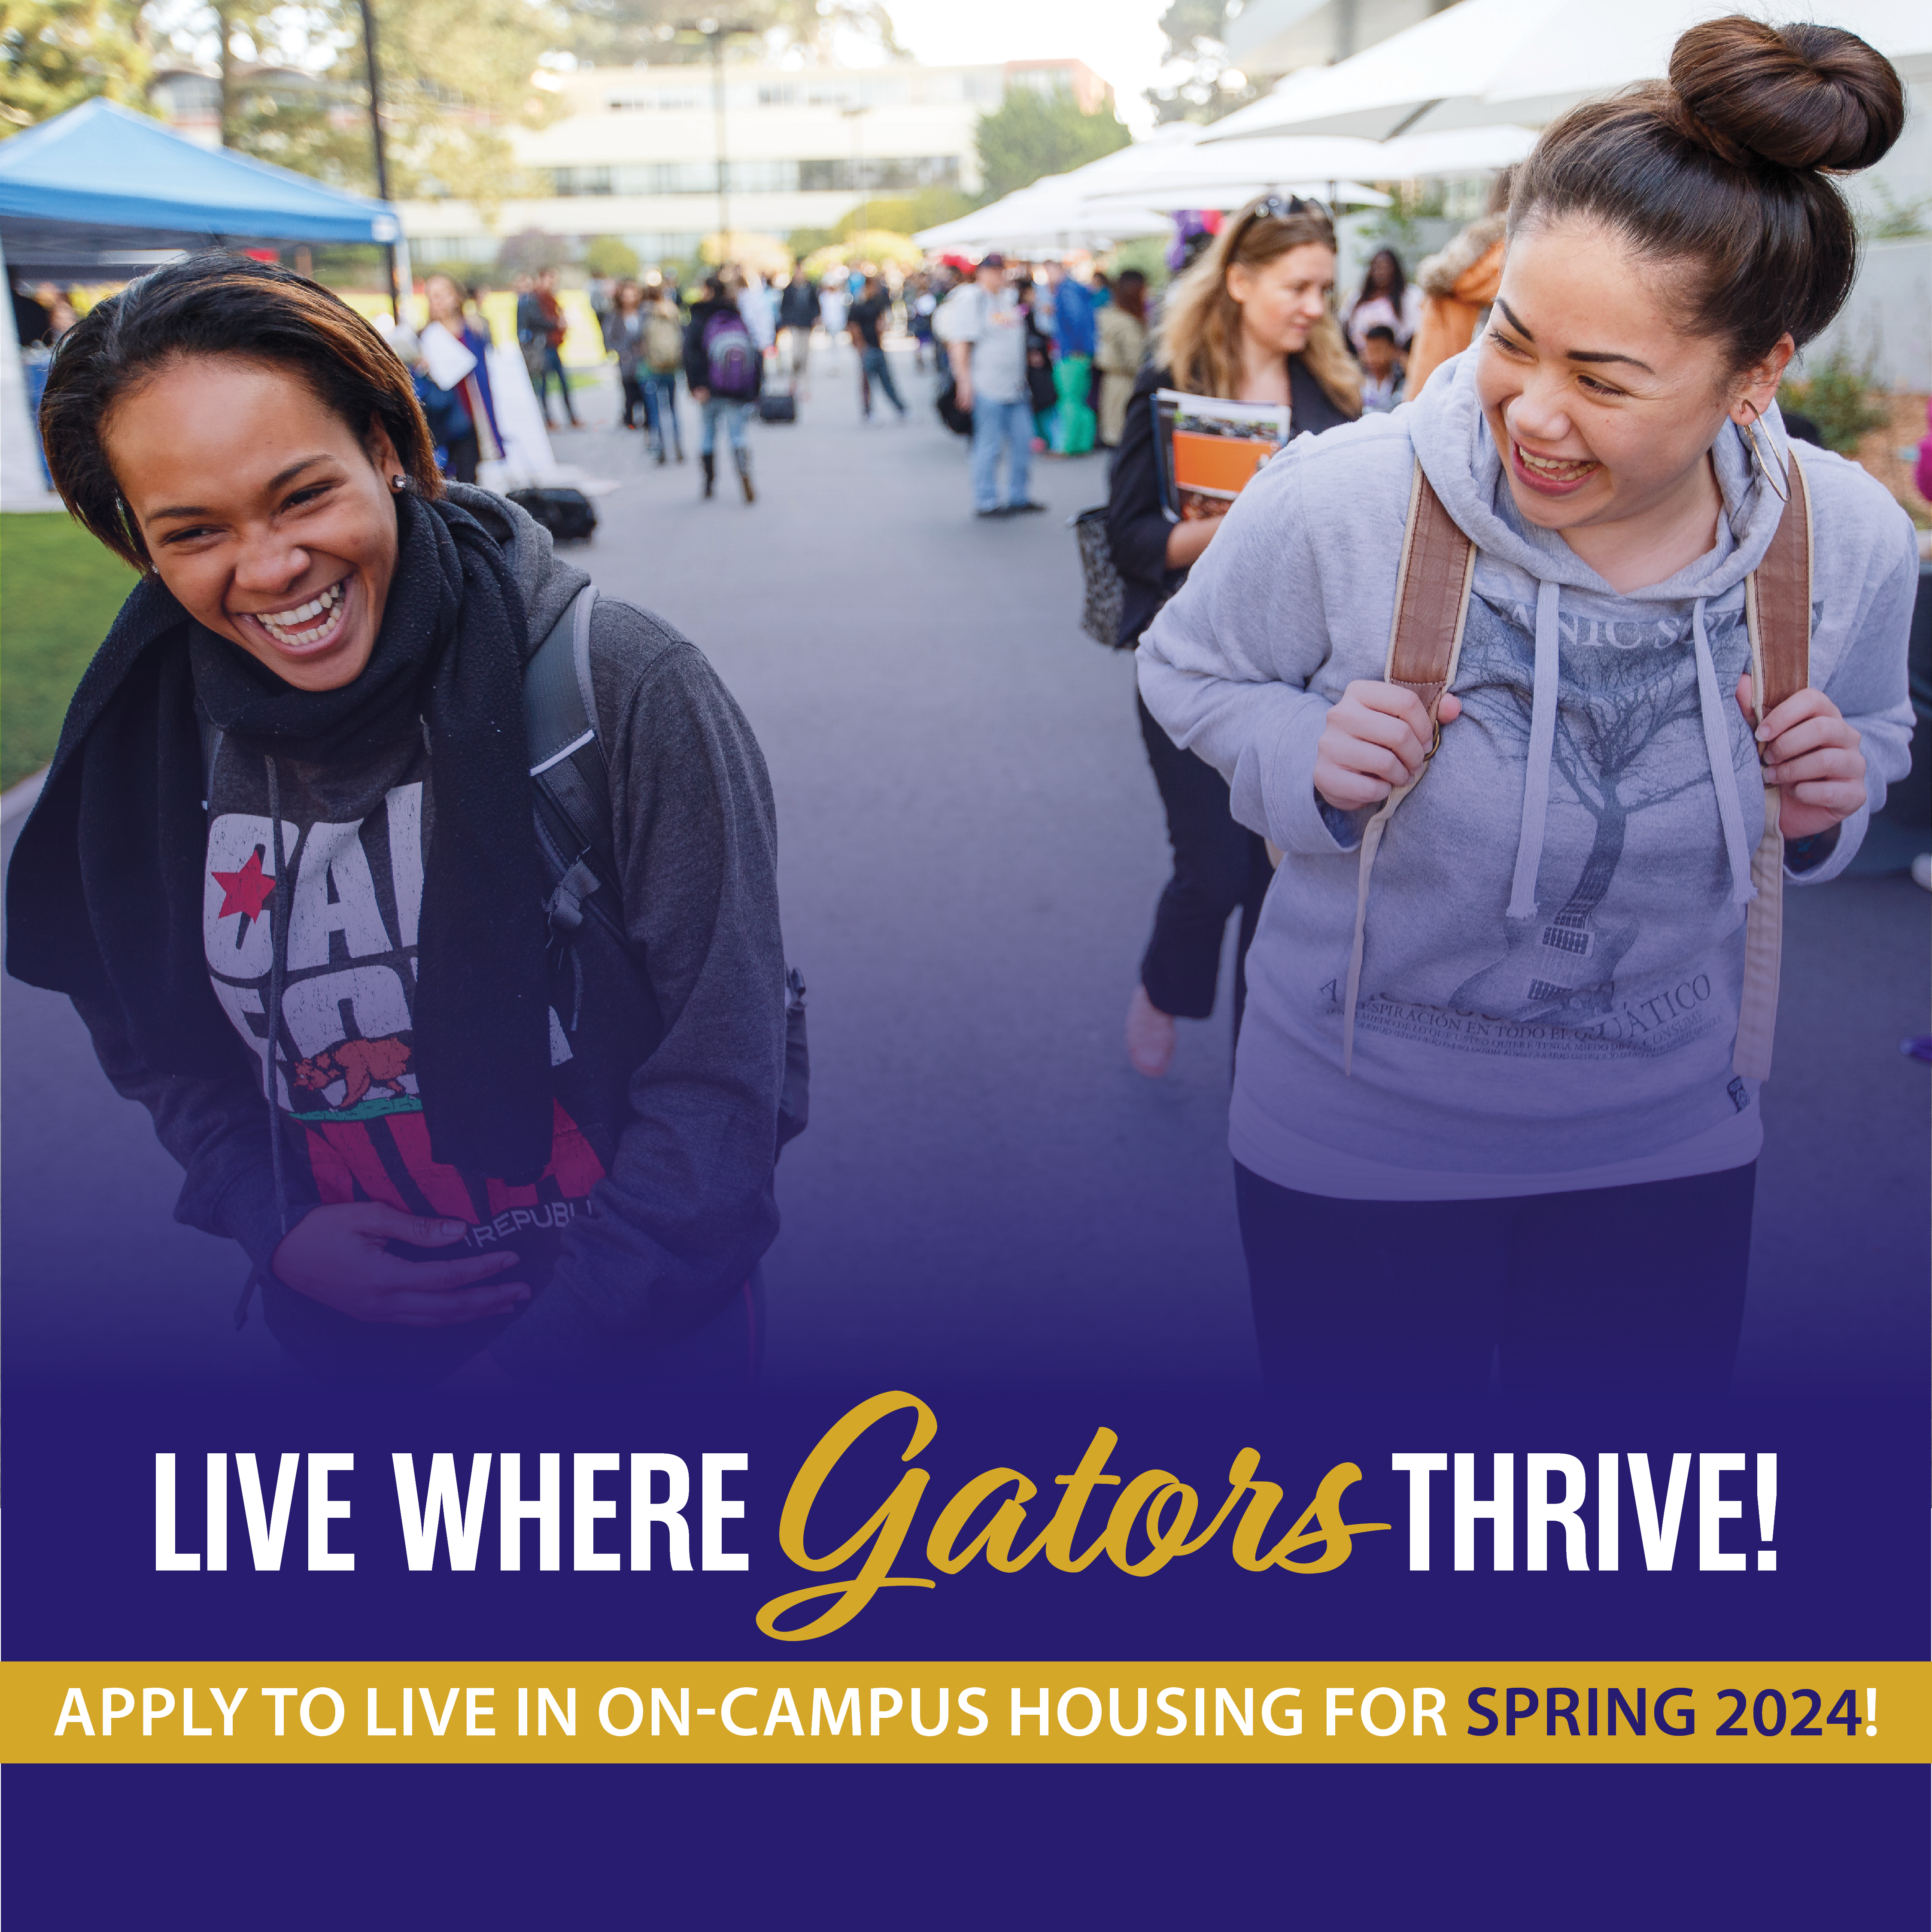 Live where Gators thrive! Apply to live on campus for spring 2024!